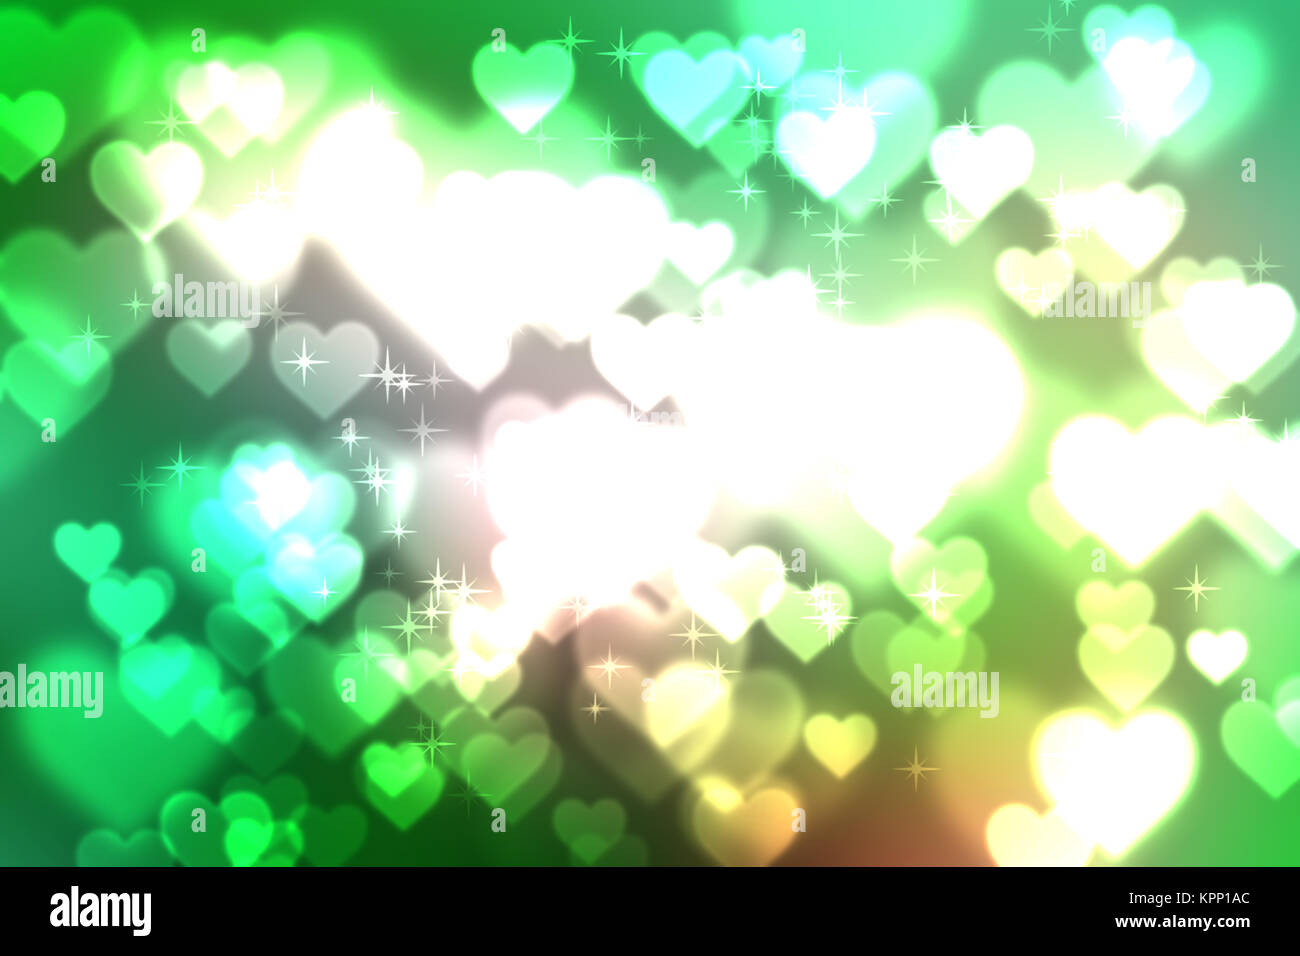 Abstract heart bokeh bright background Stock Photo